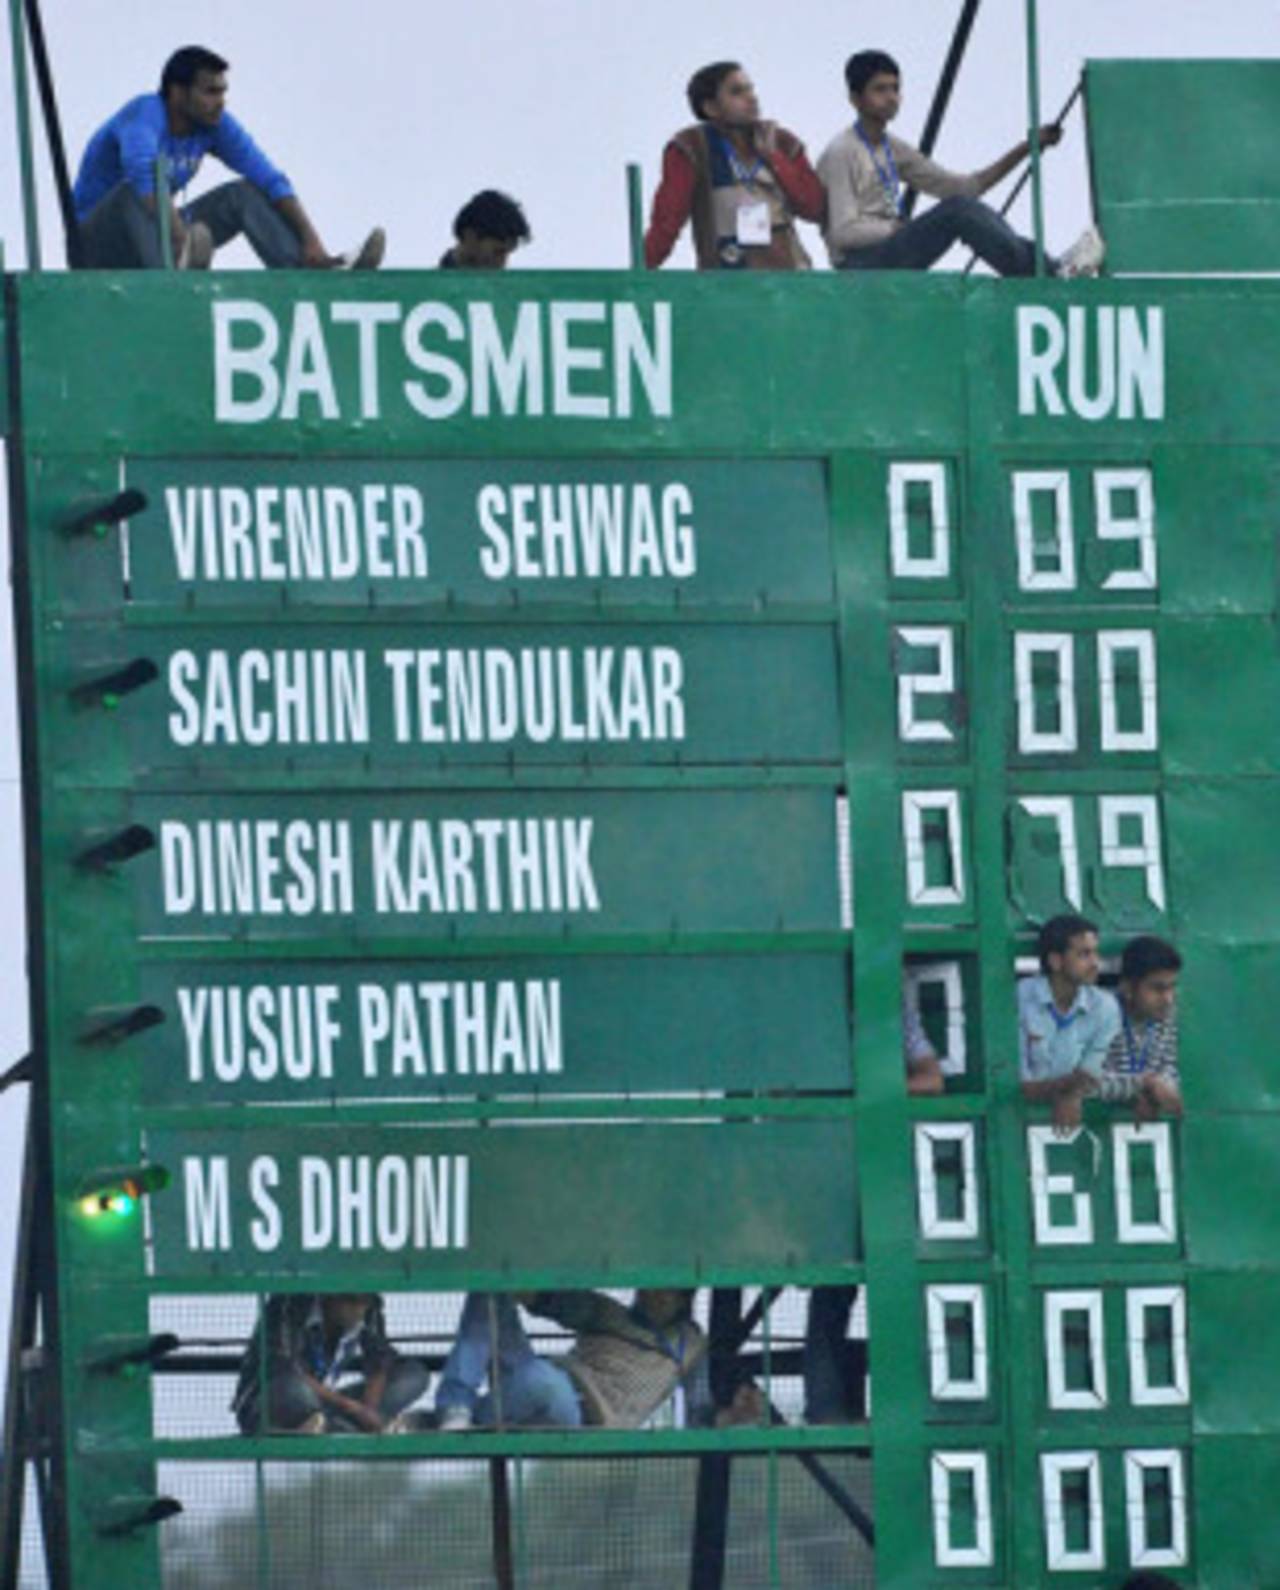 There were spectators everywhere, even on the scoreboard that displayed the historic figures, 2nd ODI, Gwalior, February 24, 2010